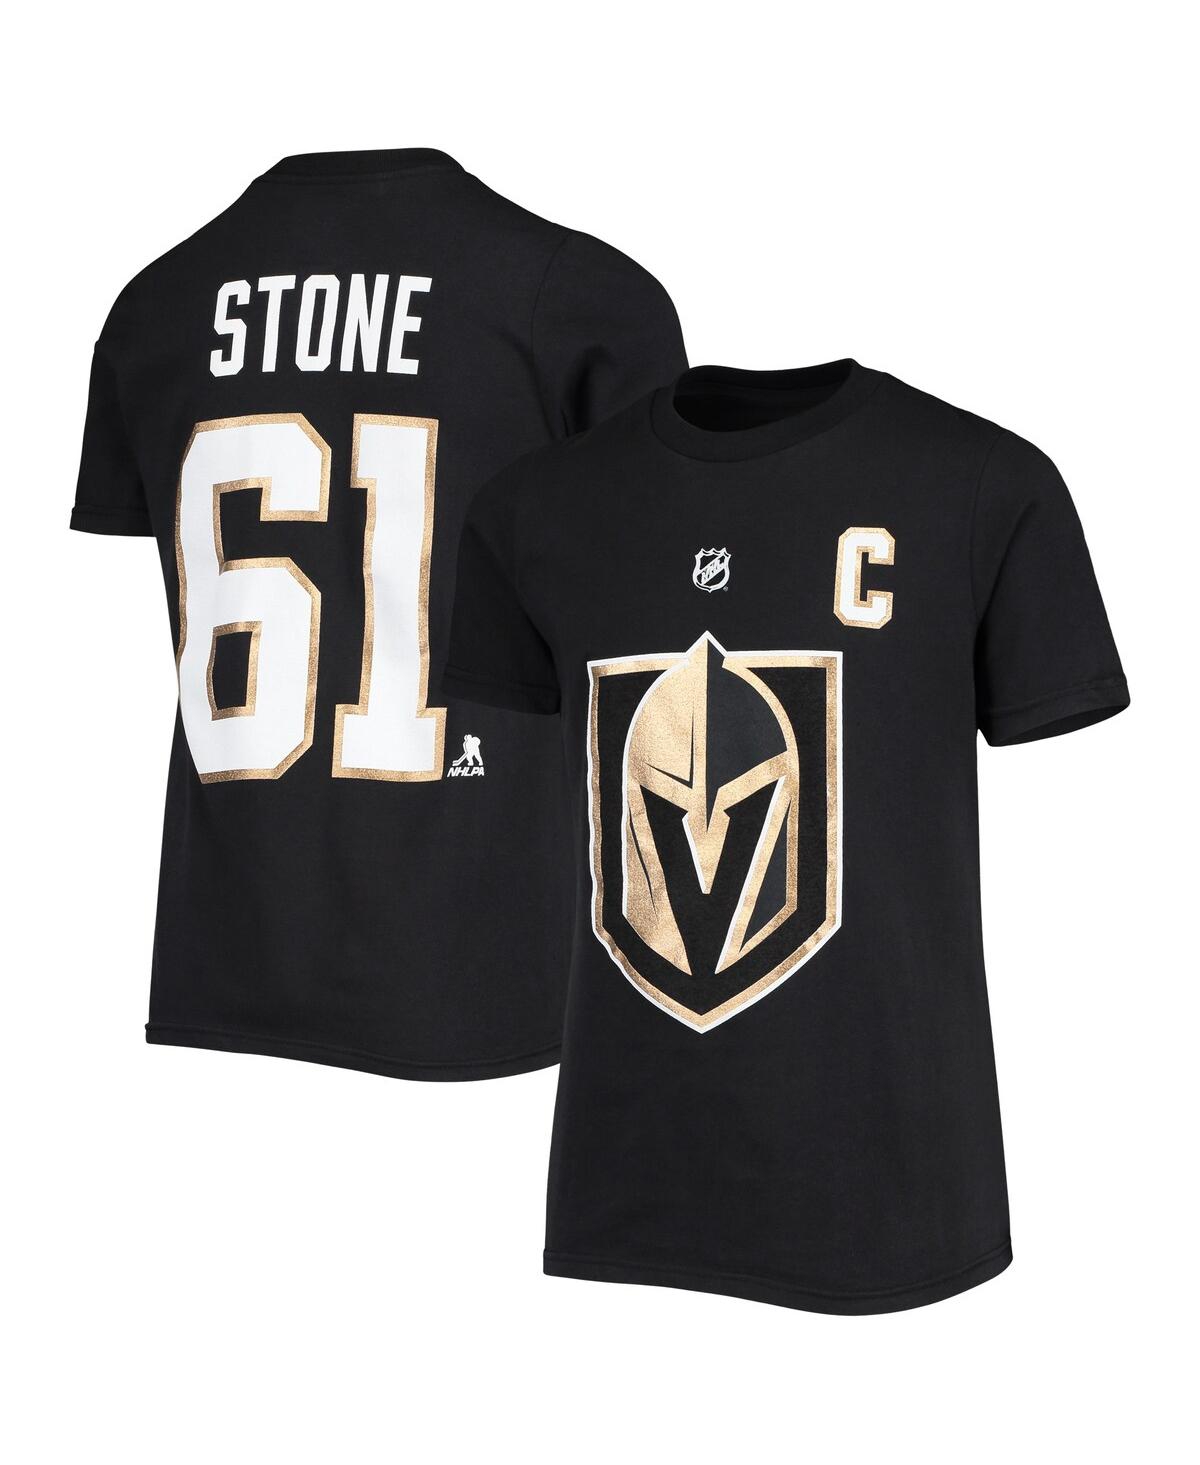 Outerstuff Kids' Big Boys Mark Stone Black Vegas Golden Knights Player Name And Number T-shirt